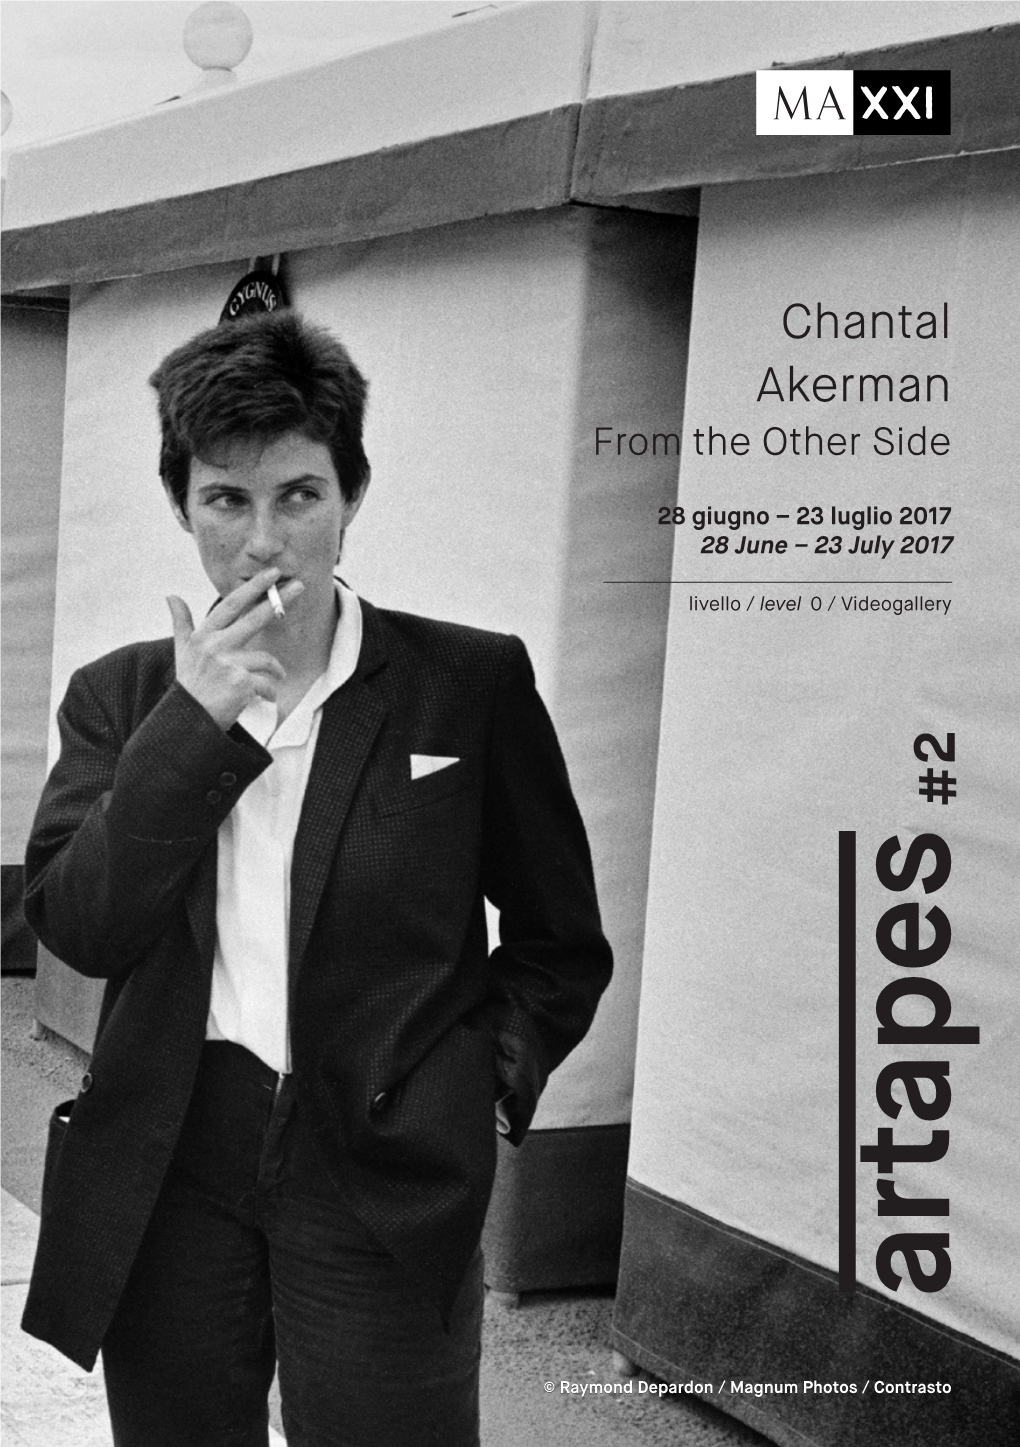 Chantal Akerman from the Other Side